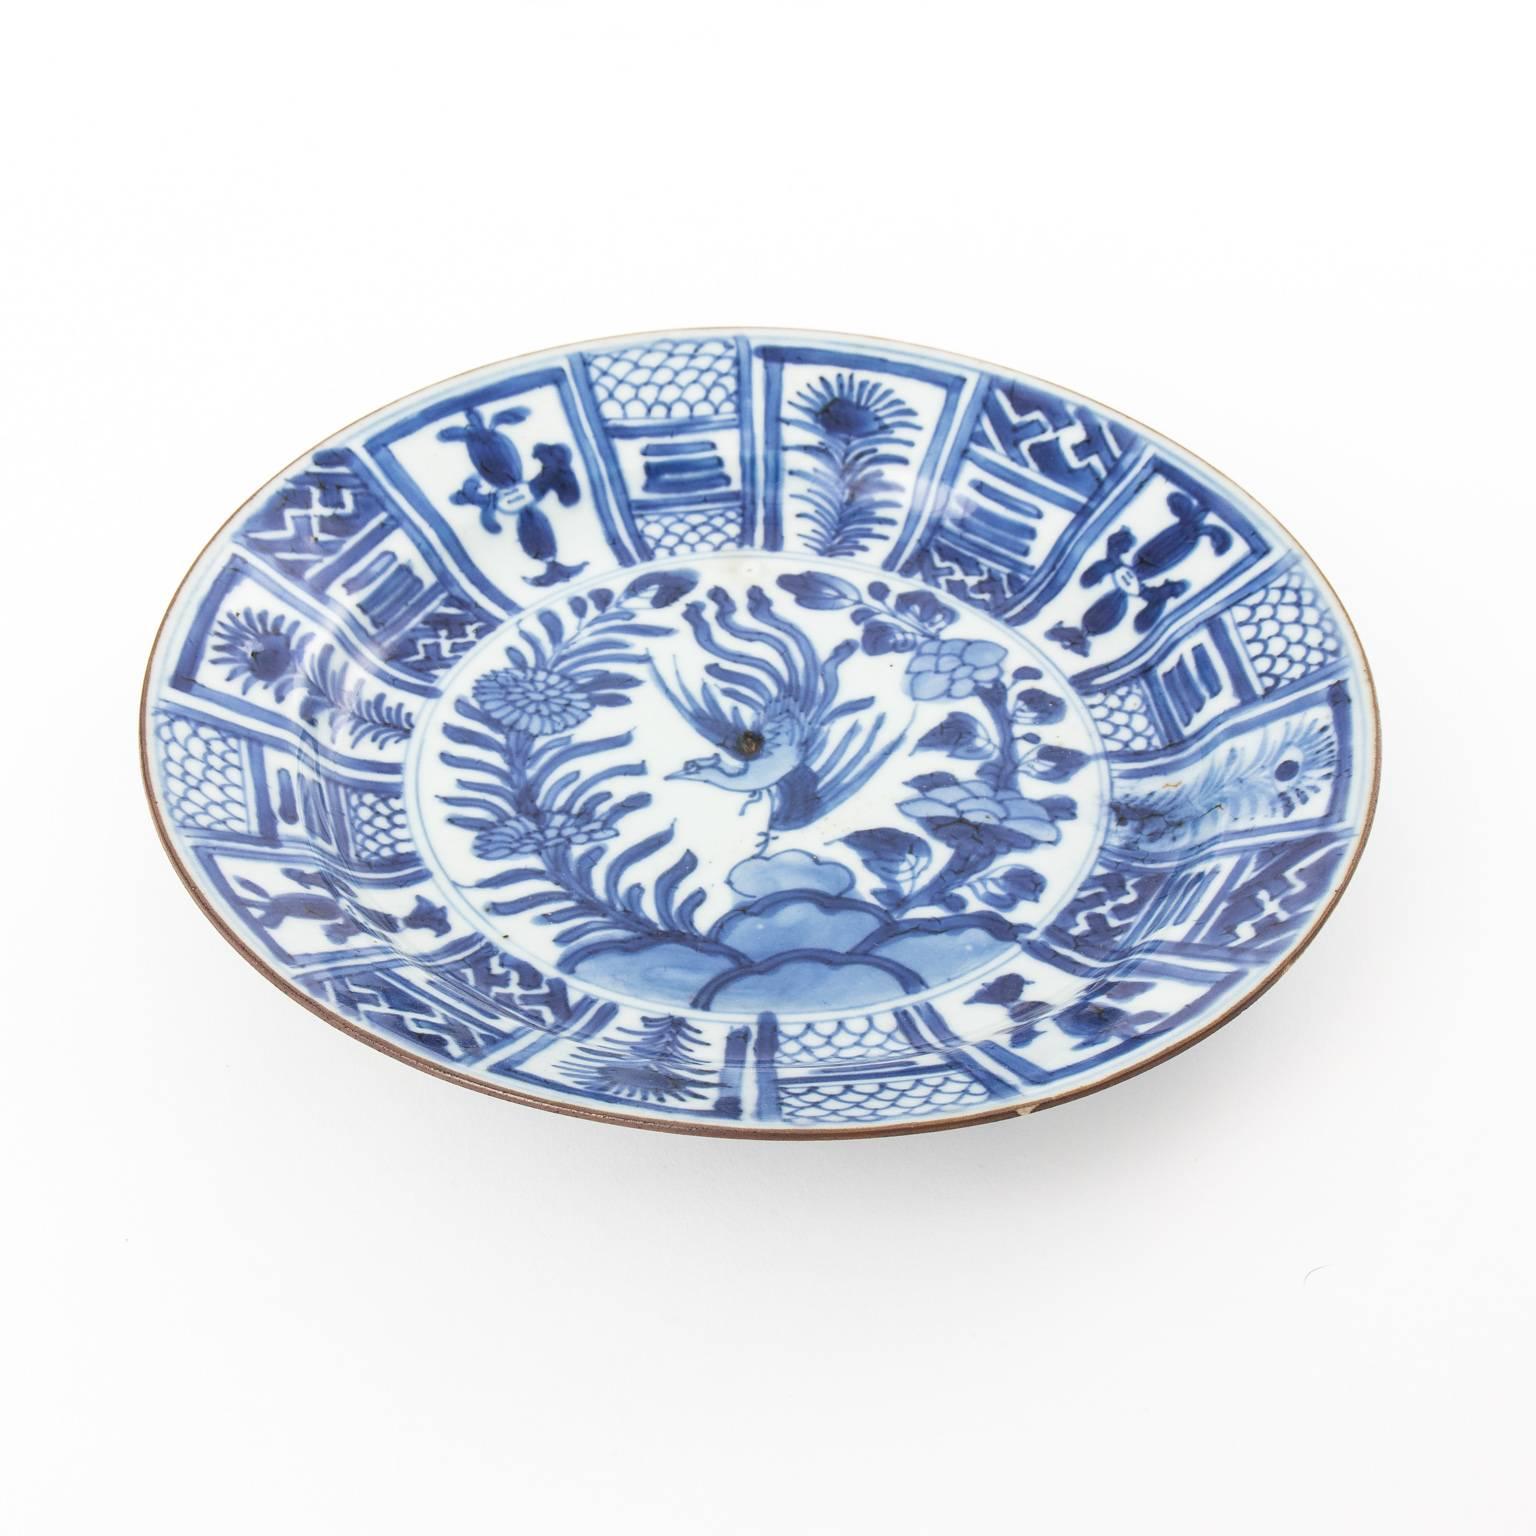 Painted Qing Dynasty Porcelain Plate For Sale